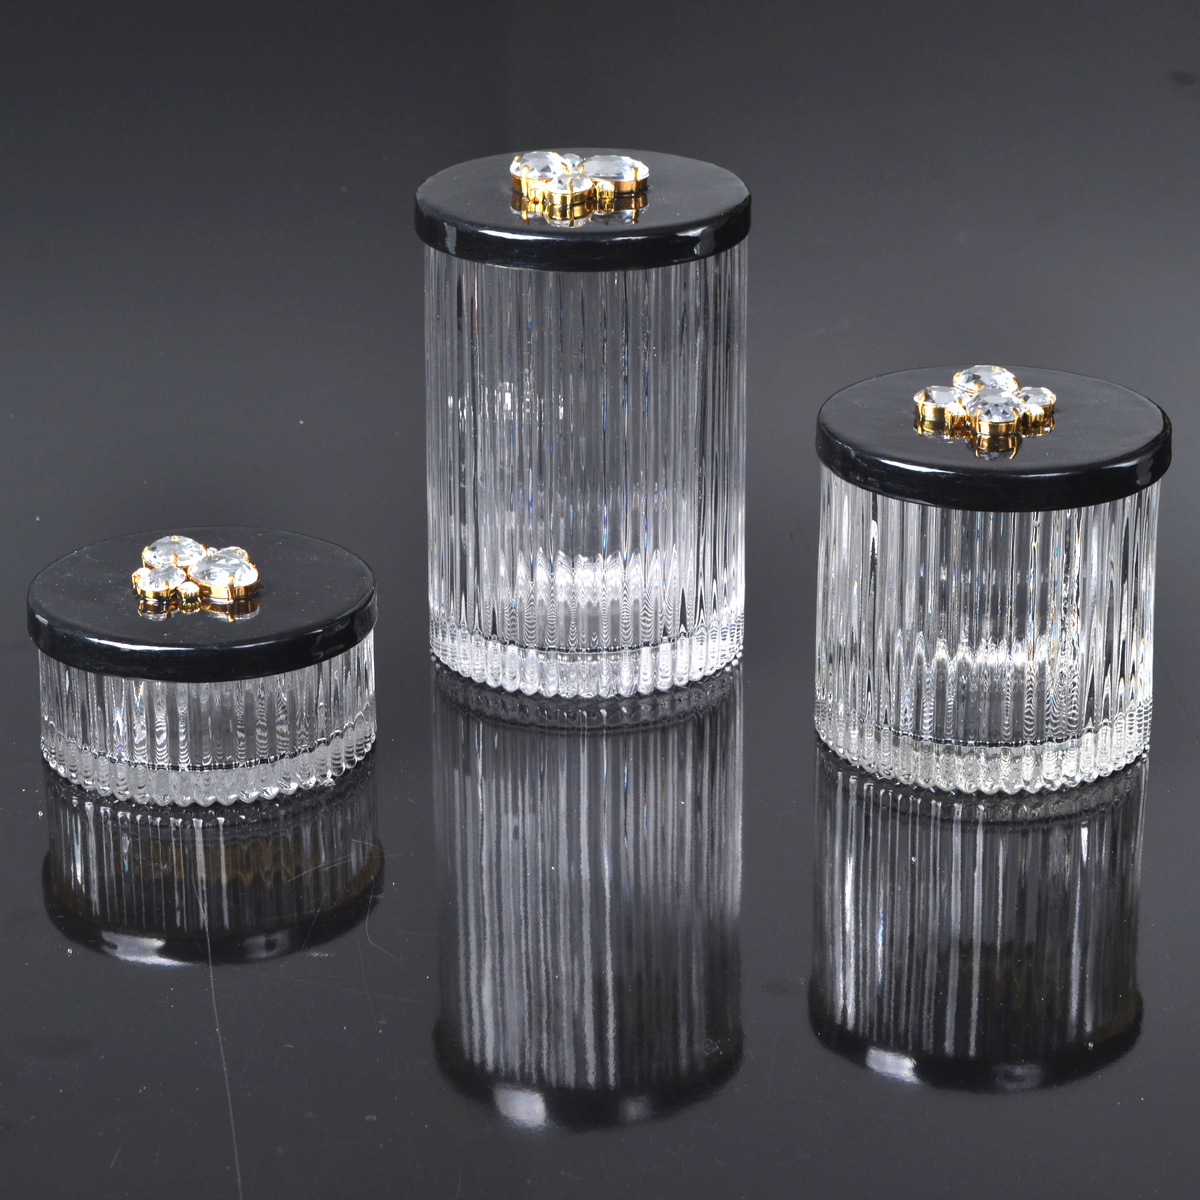 Mike and Ally Vanity Jars Black Enamel Set with Jewel Embellishment on Lid with Refelections